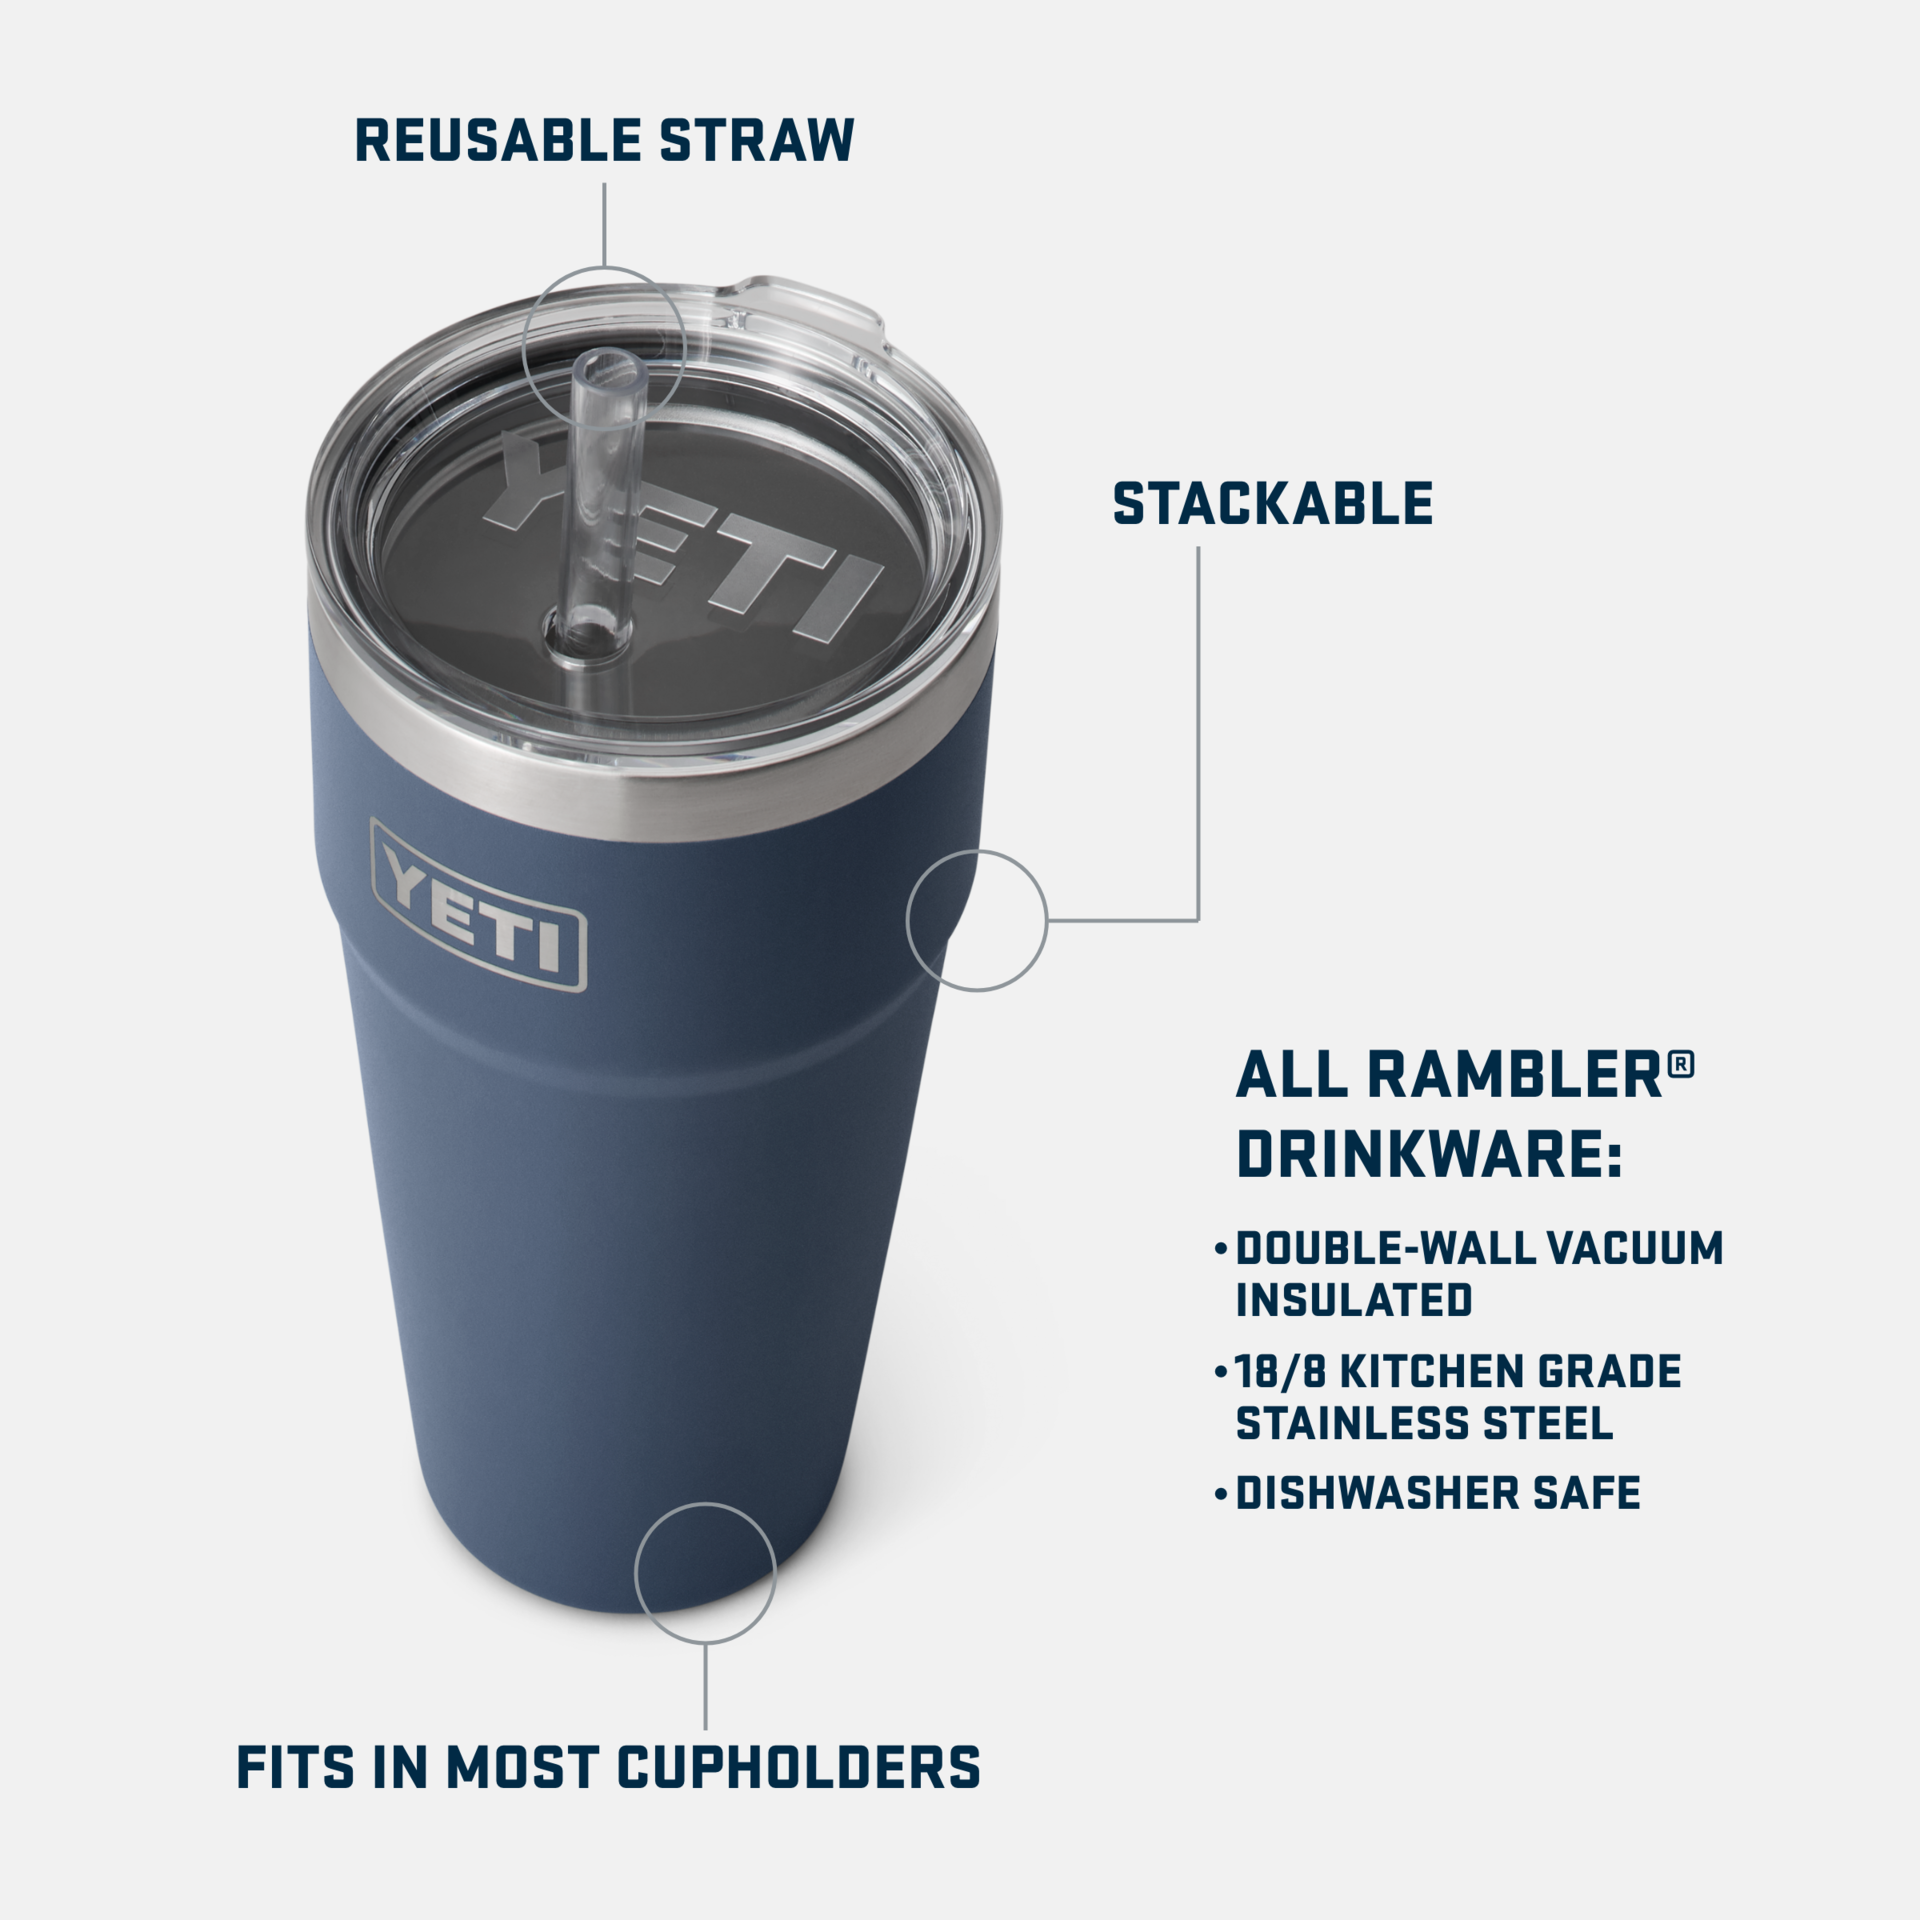 Yeti Rambler 26oz Stackable Cup with Straw Lid - Offshore Blue